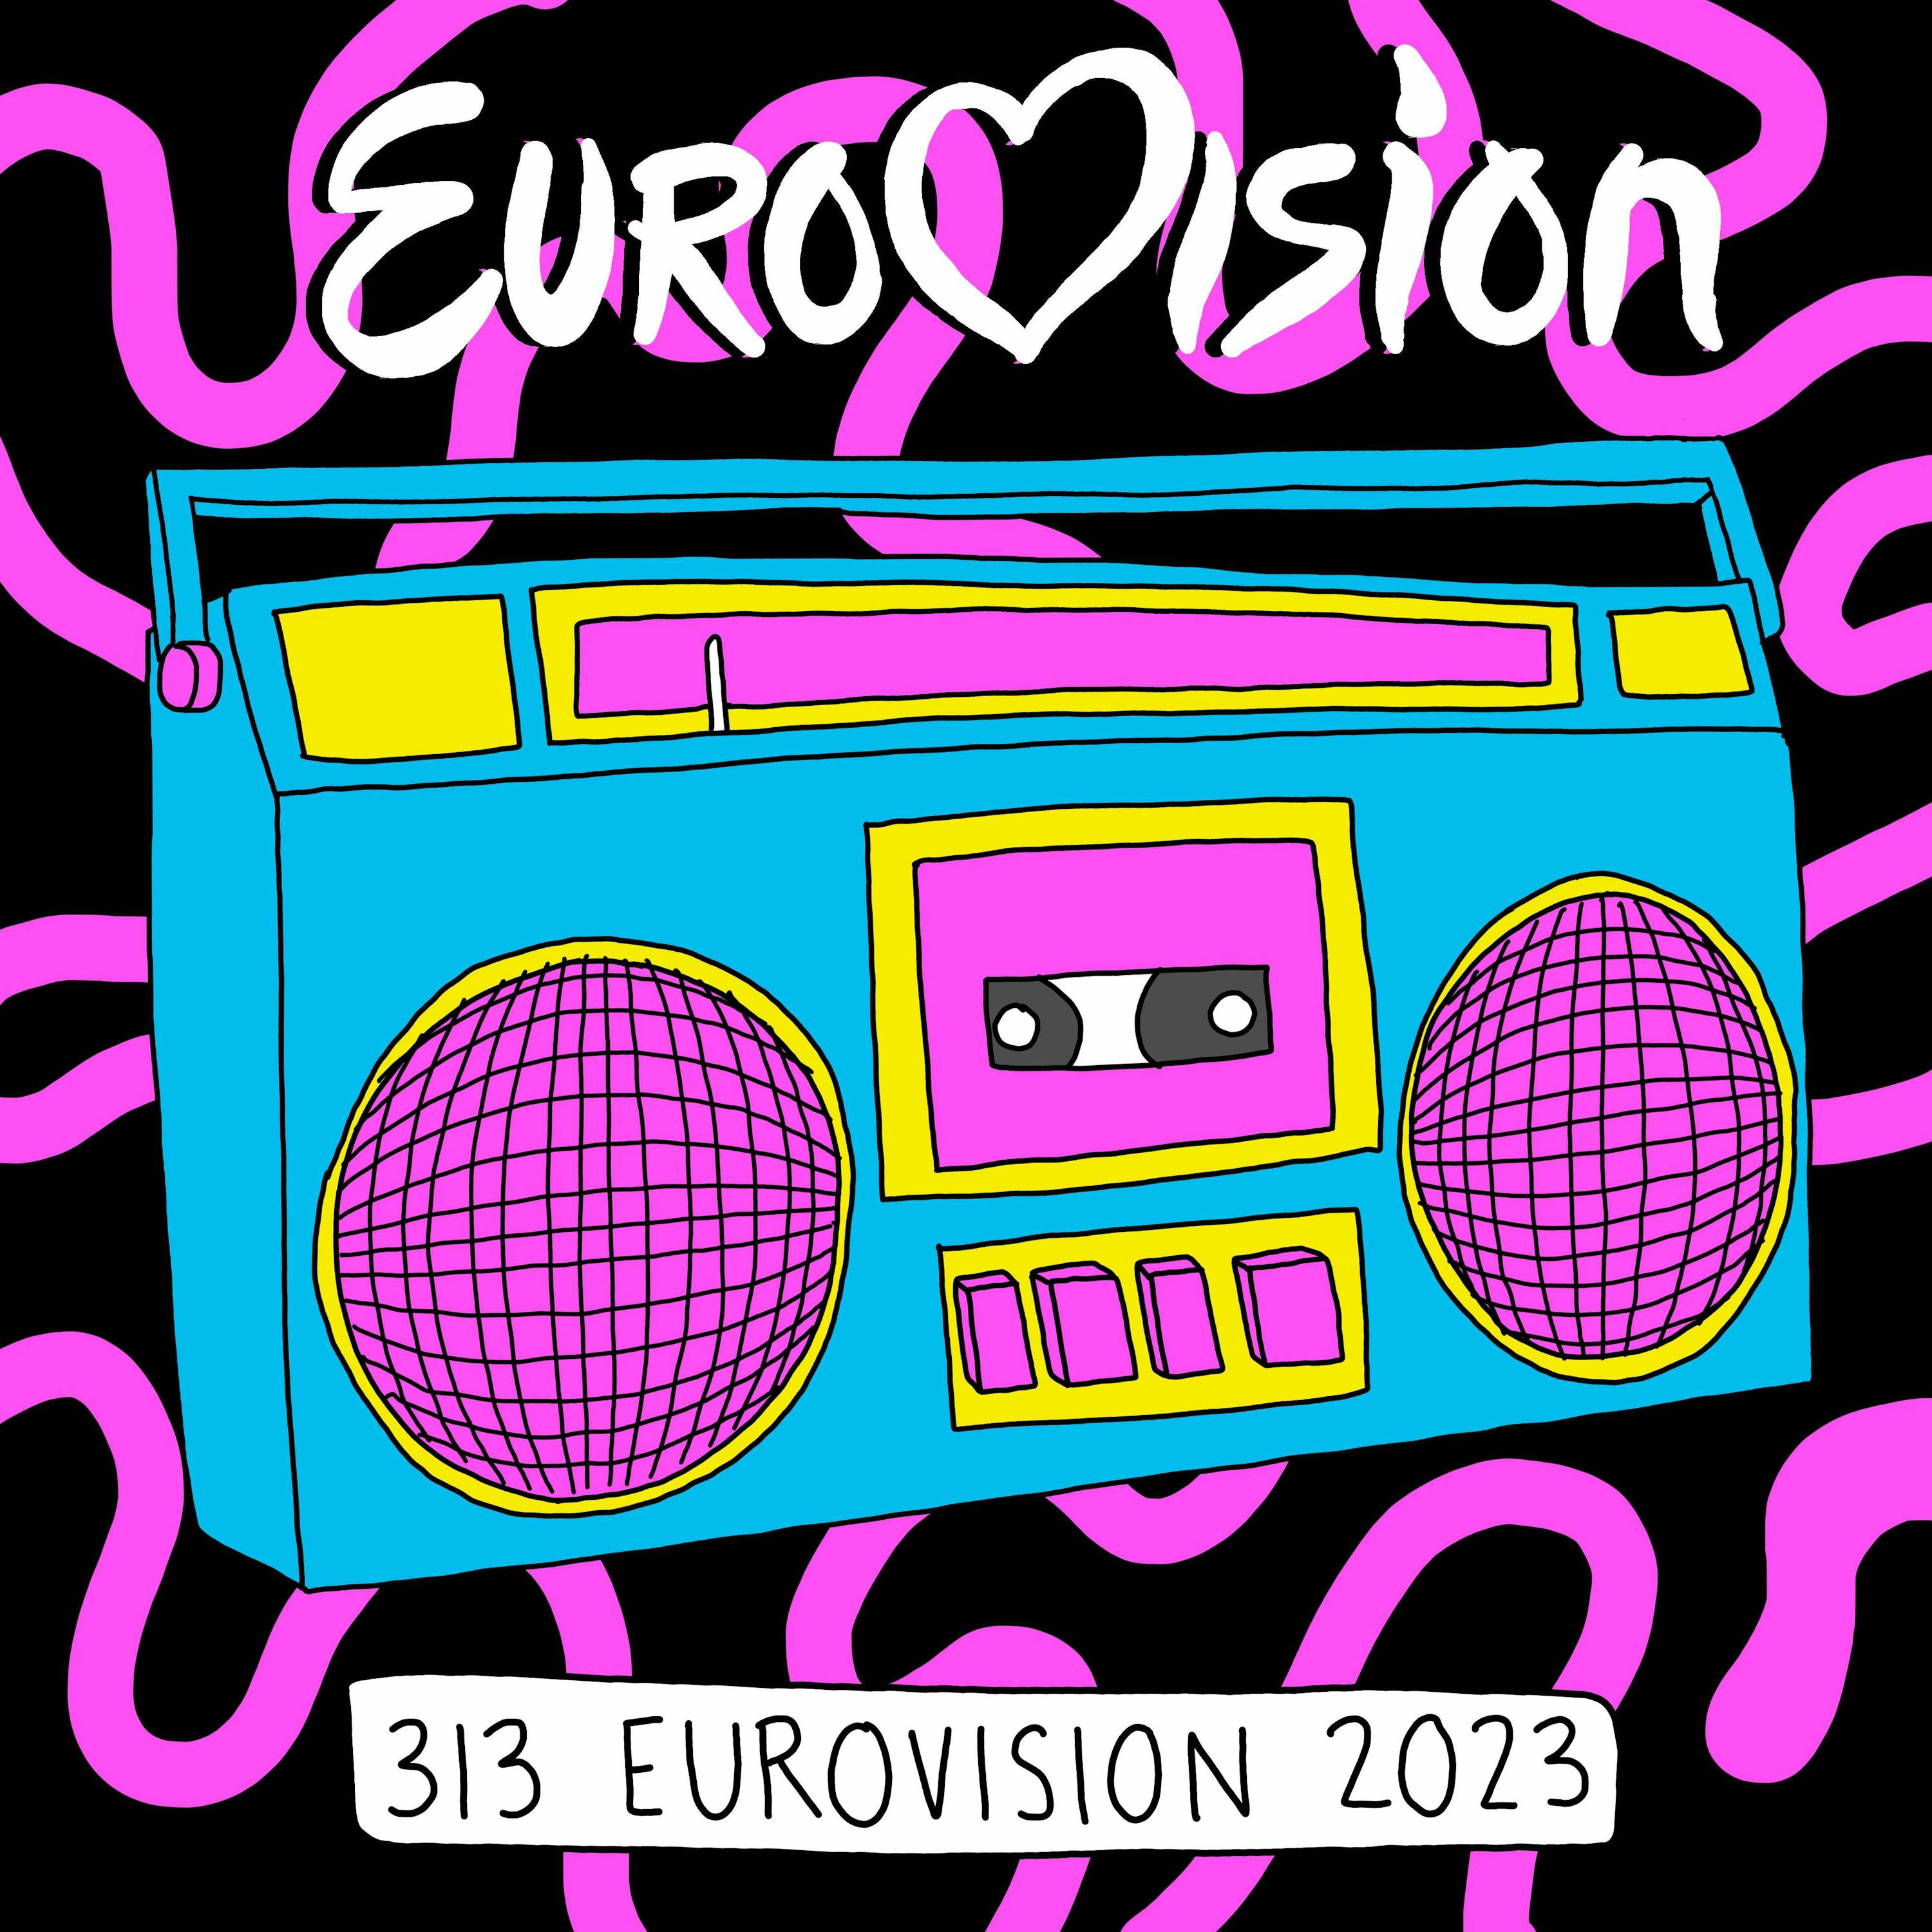 From Westeros-techno to trance metal: Eurovision 2023